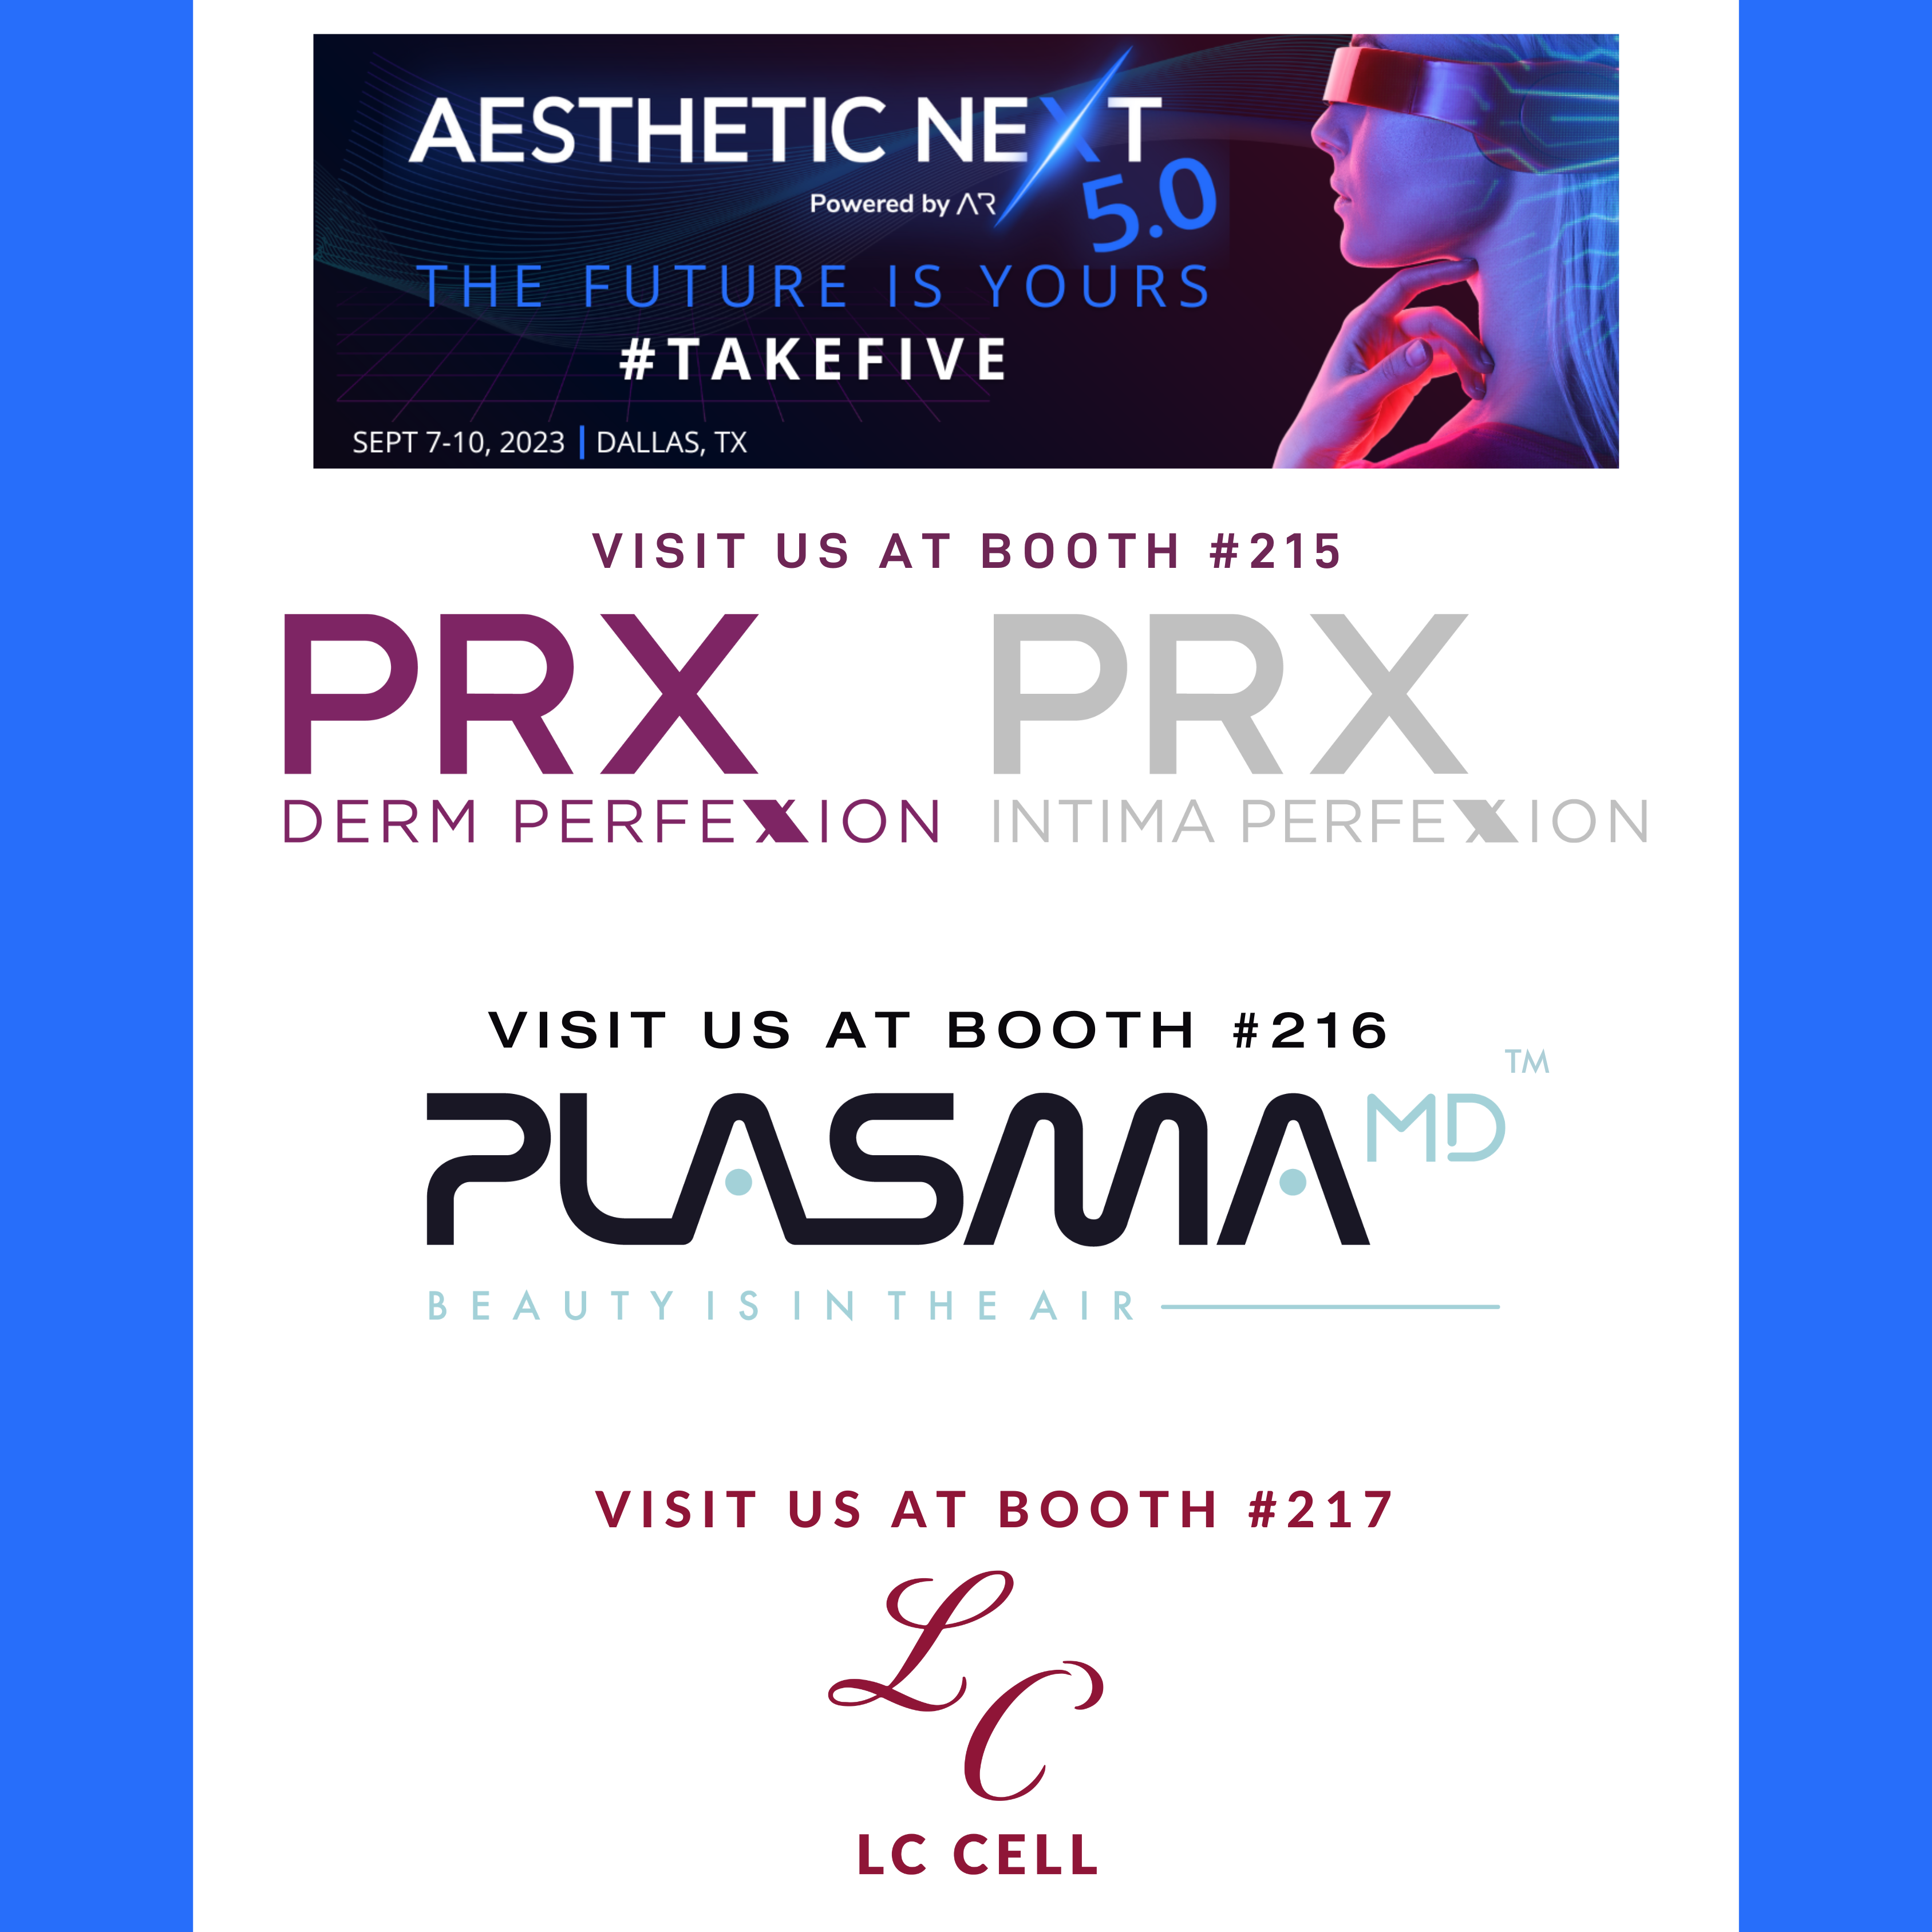 Aesthetic NEXT 5.0 Dallas TX- Sept 7-10 2023... come visit us at our booths 215, 216 & 217